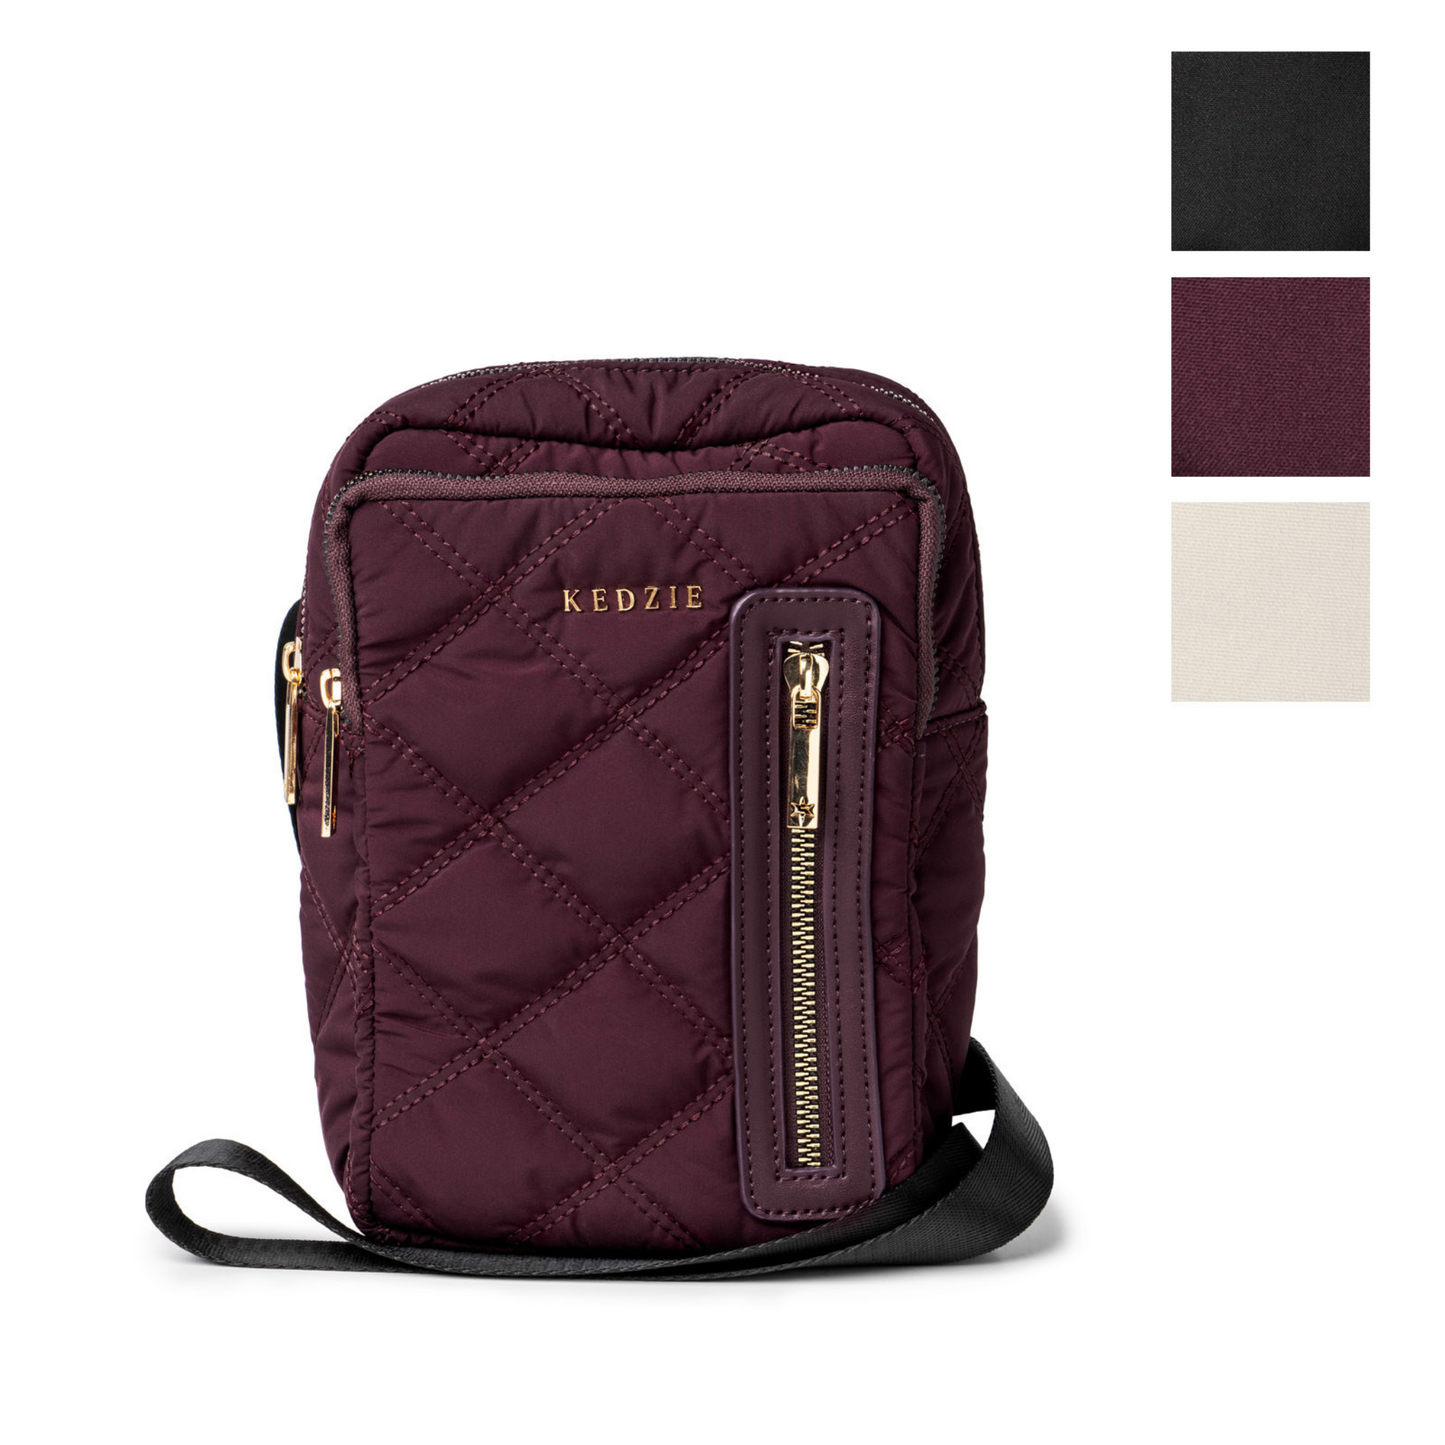 Kedzie quilted convertible crossbody purse. Available in maroon, black, or light grey 